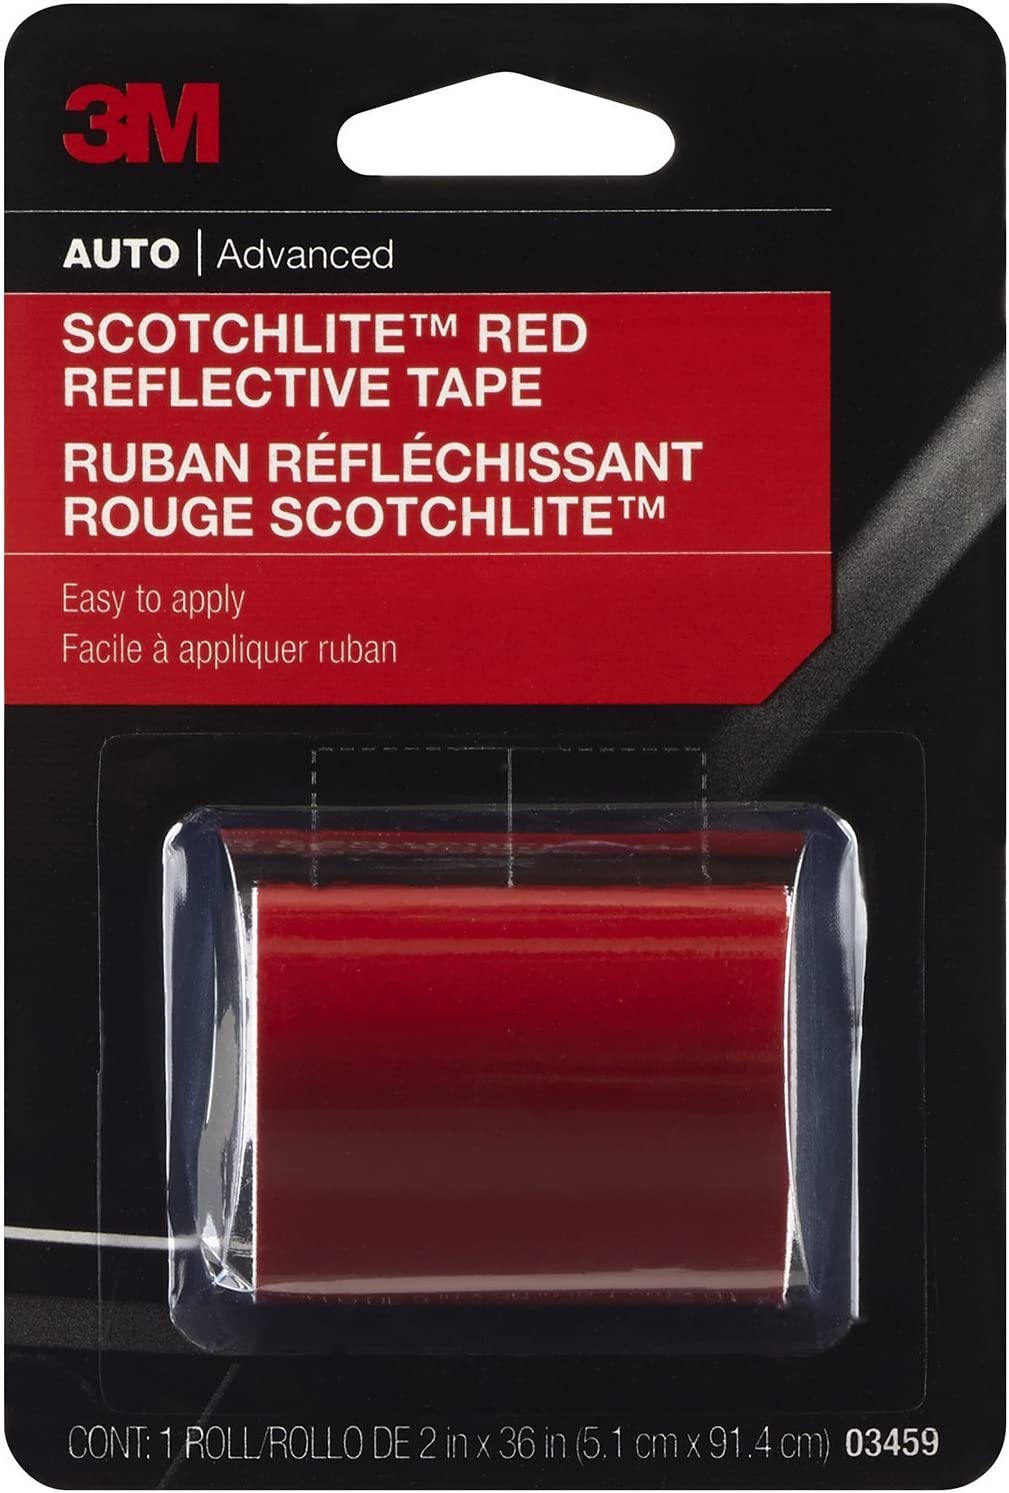 3M Scotchlite Red Reflective Tape 03459 2 in x 36 in 1 Roll